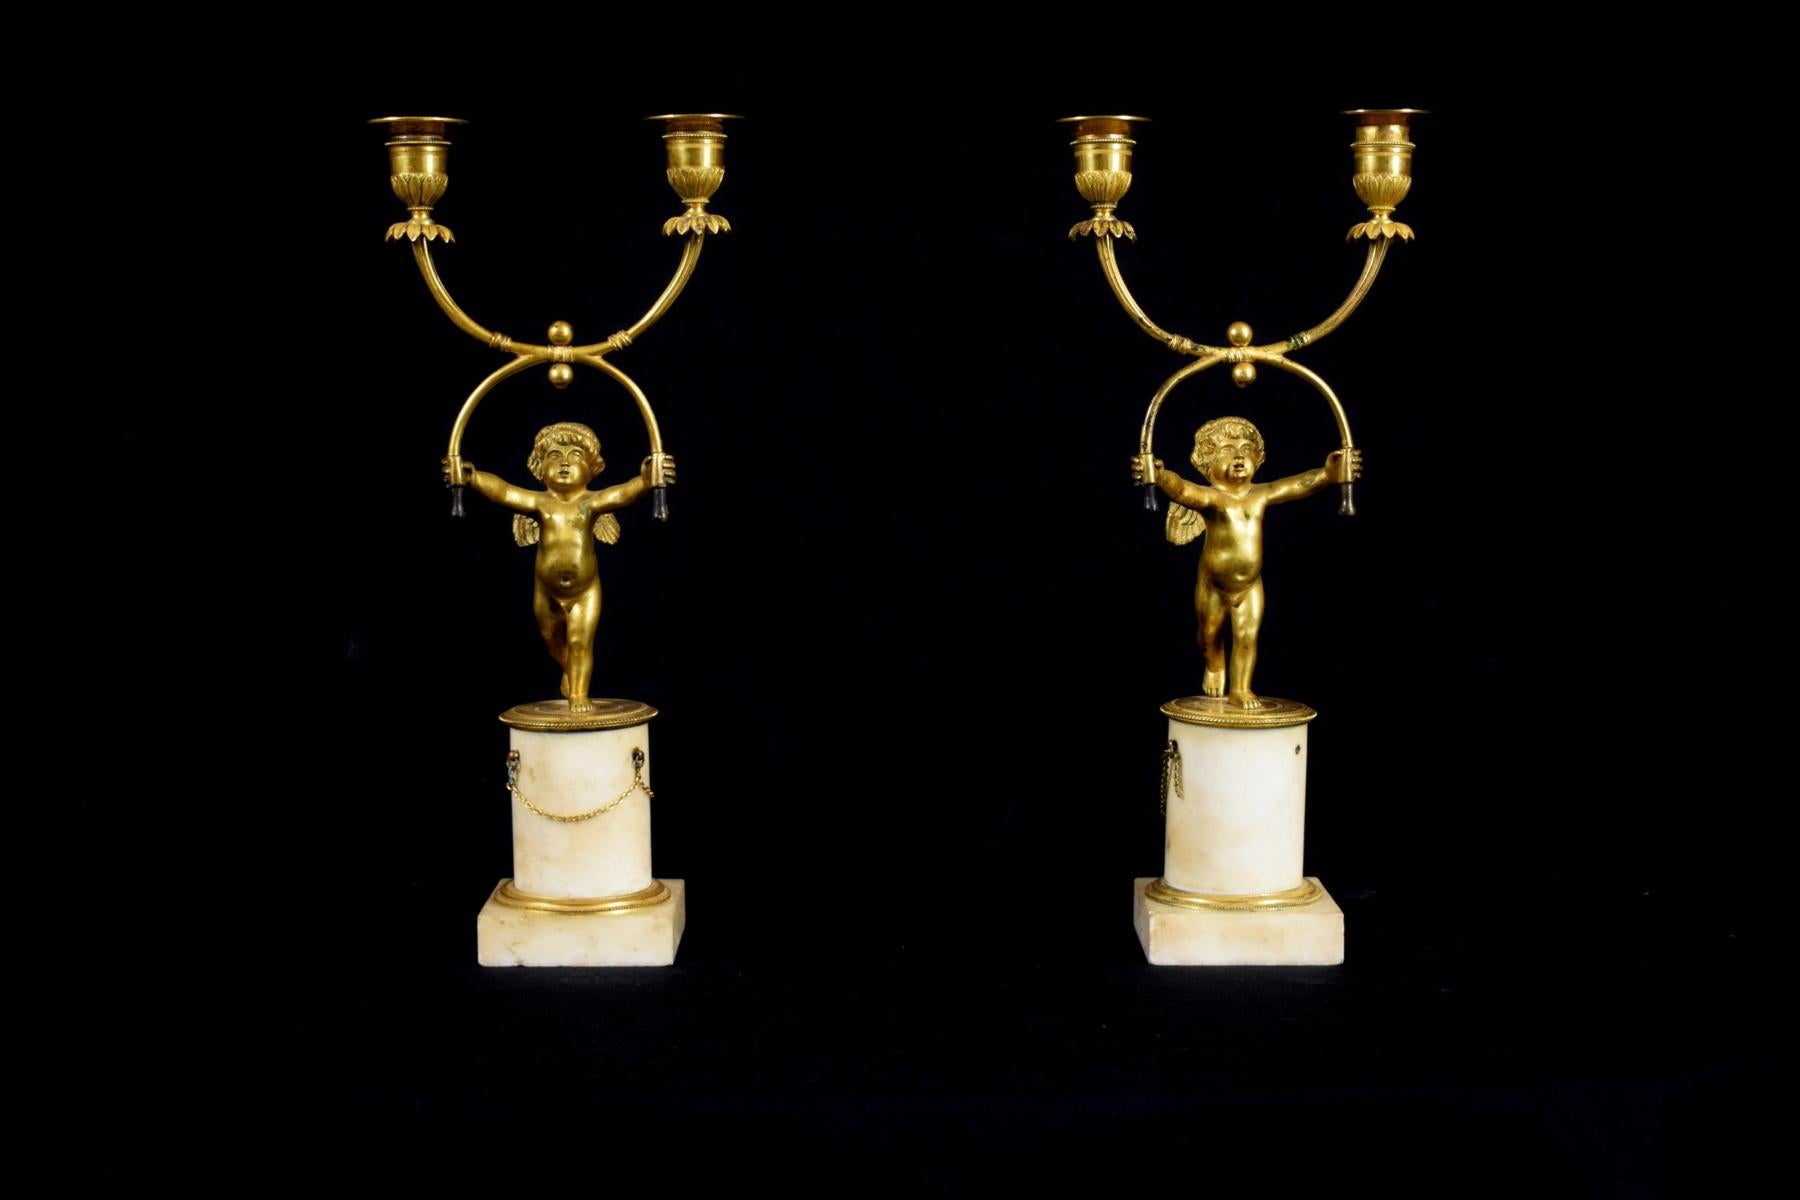 18th century, pair of French two-light gilt bronze candlesticks

Measurement: H total 35 cm; H base 10,5 cm x W 8,2 x 8,2 cm; W putti 16 cm x D 10 cm

The splendid pair of candlesticks was made in France in the 18th century in finely carved bronze